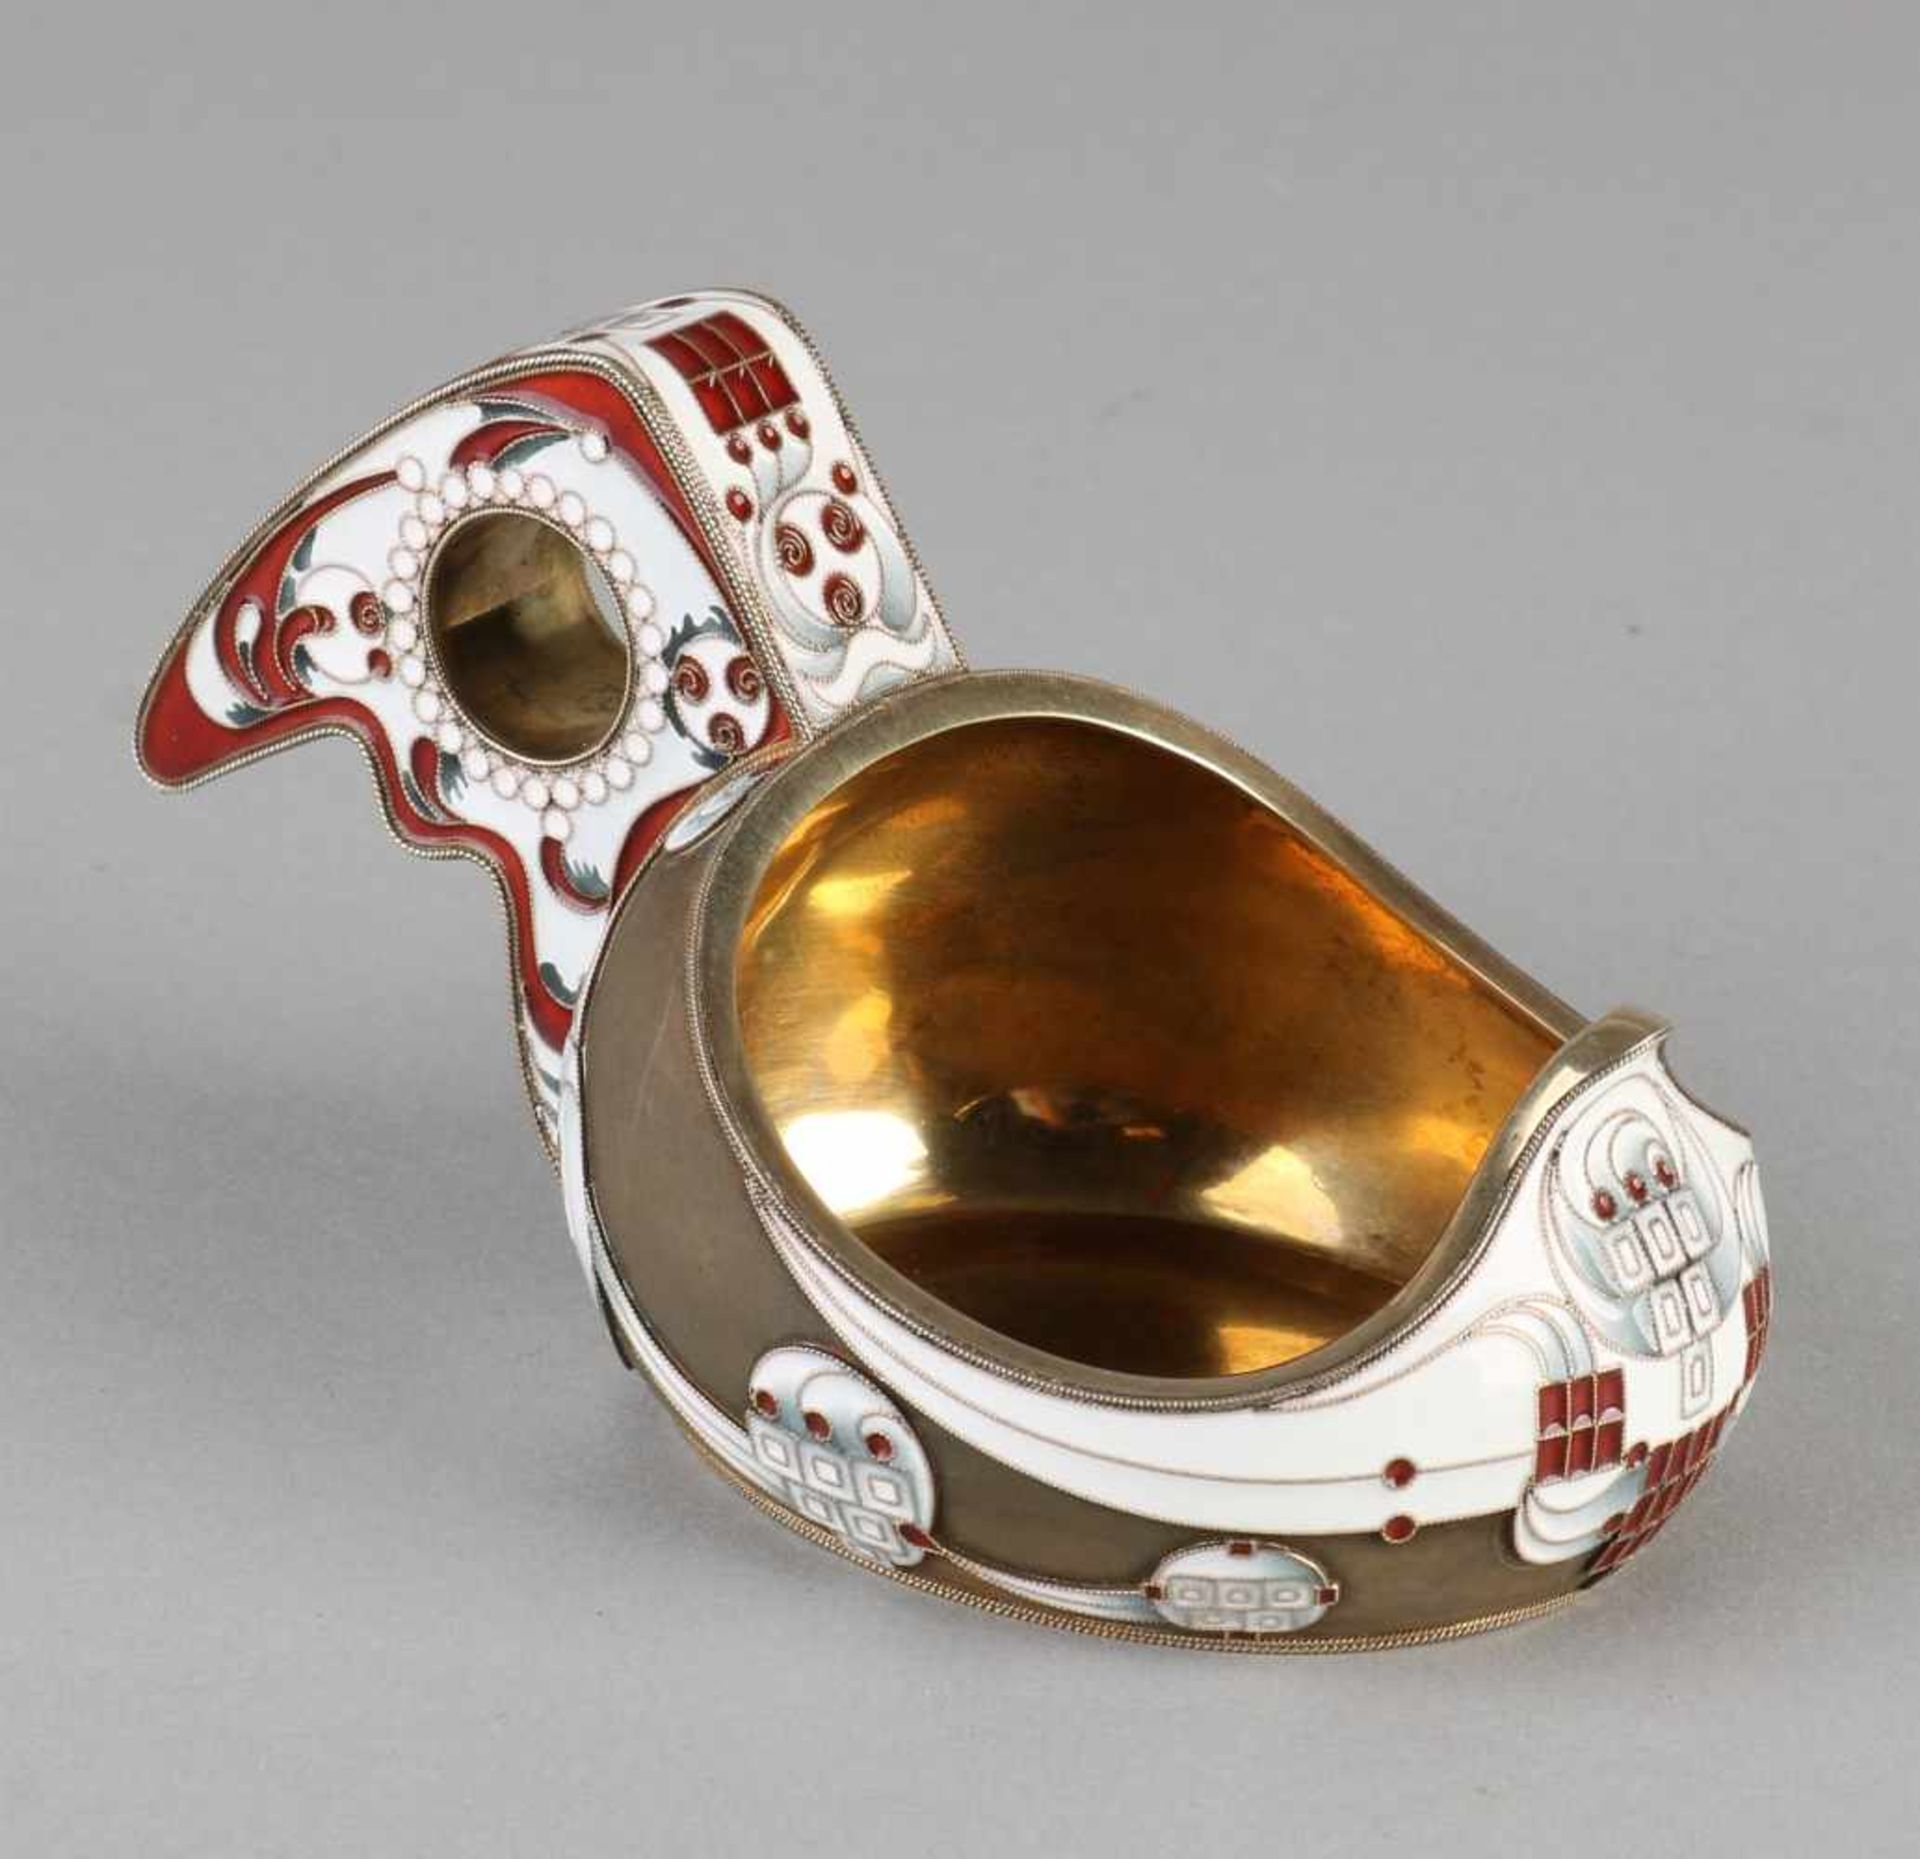 Silver kovsch, 84 zolotniks, provided with gold plating, in part with enamel decorations in white